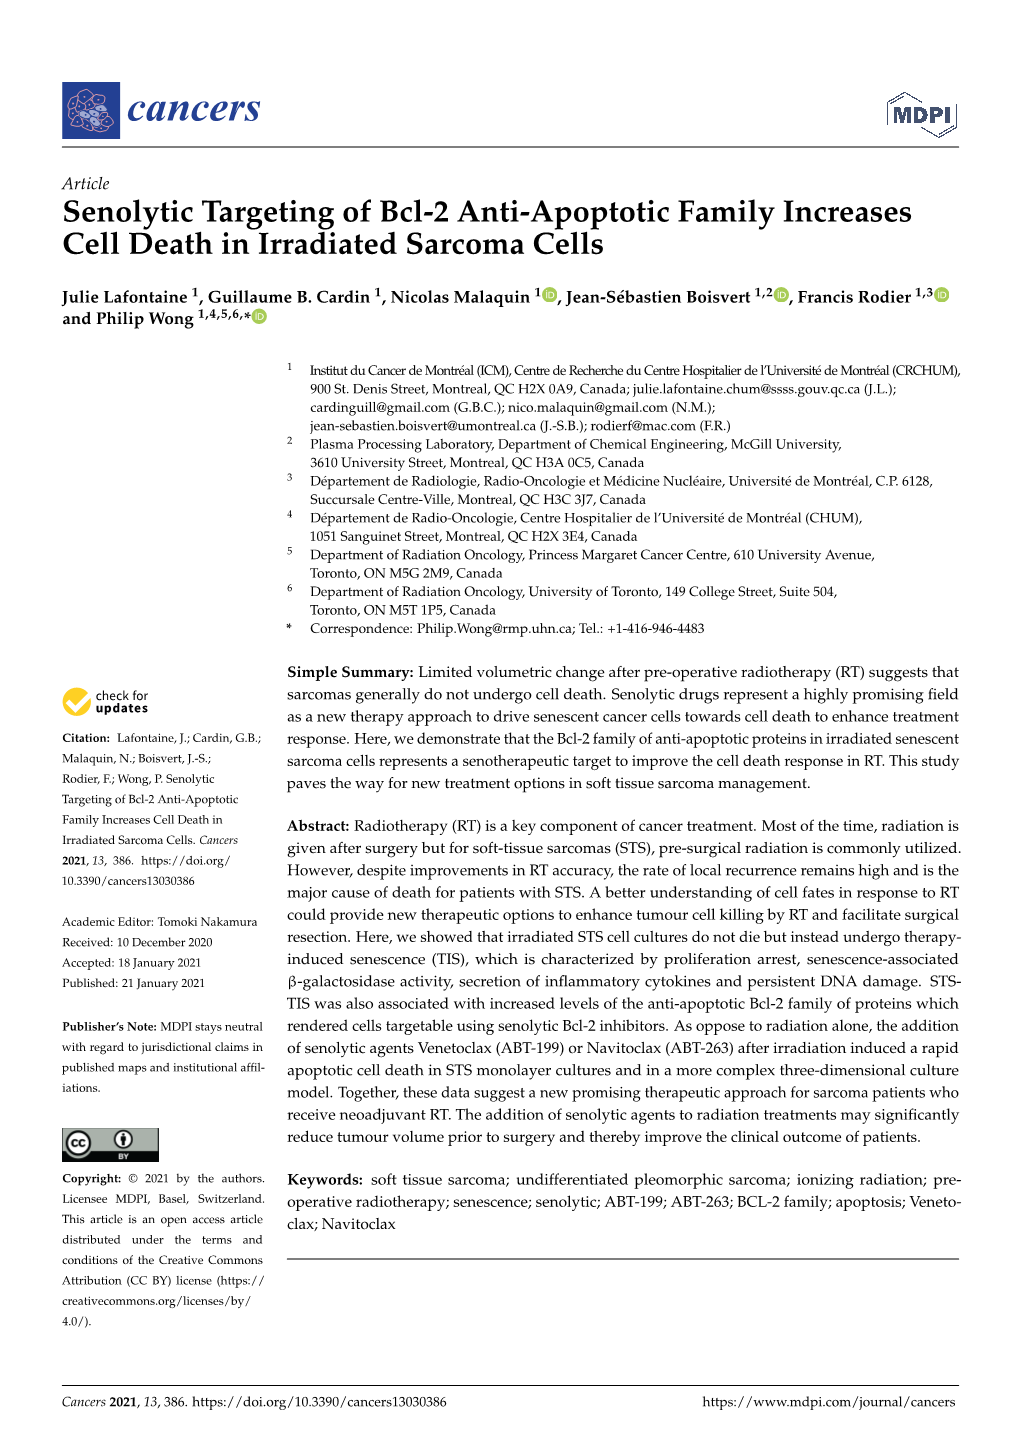 Senolytic Targeting of Bcl-2 Anti-Apoptotic Family Increases Cell Death in Irradiated Sarcoma Cells